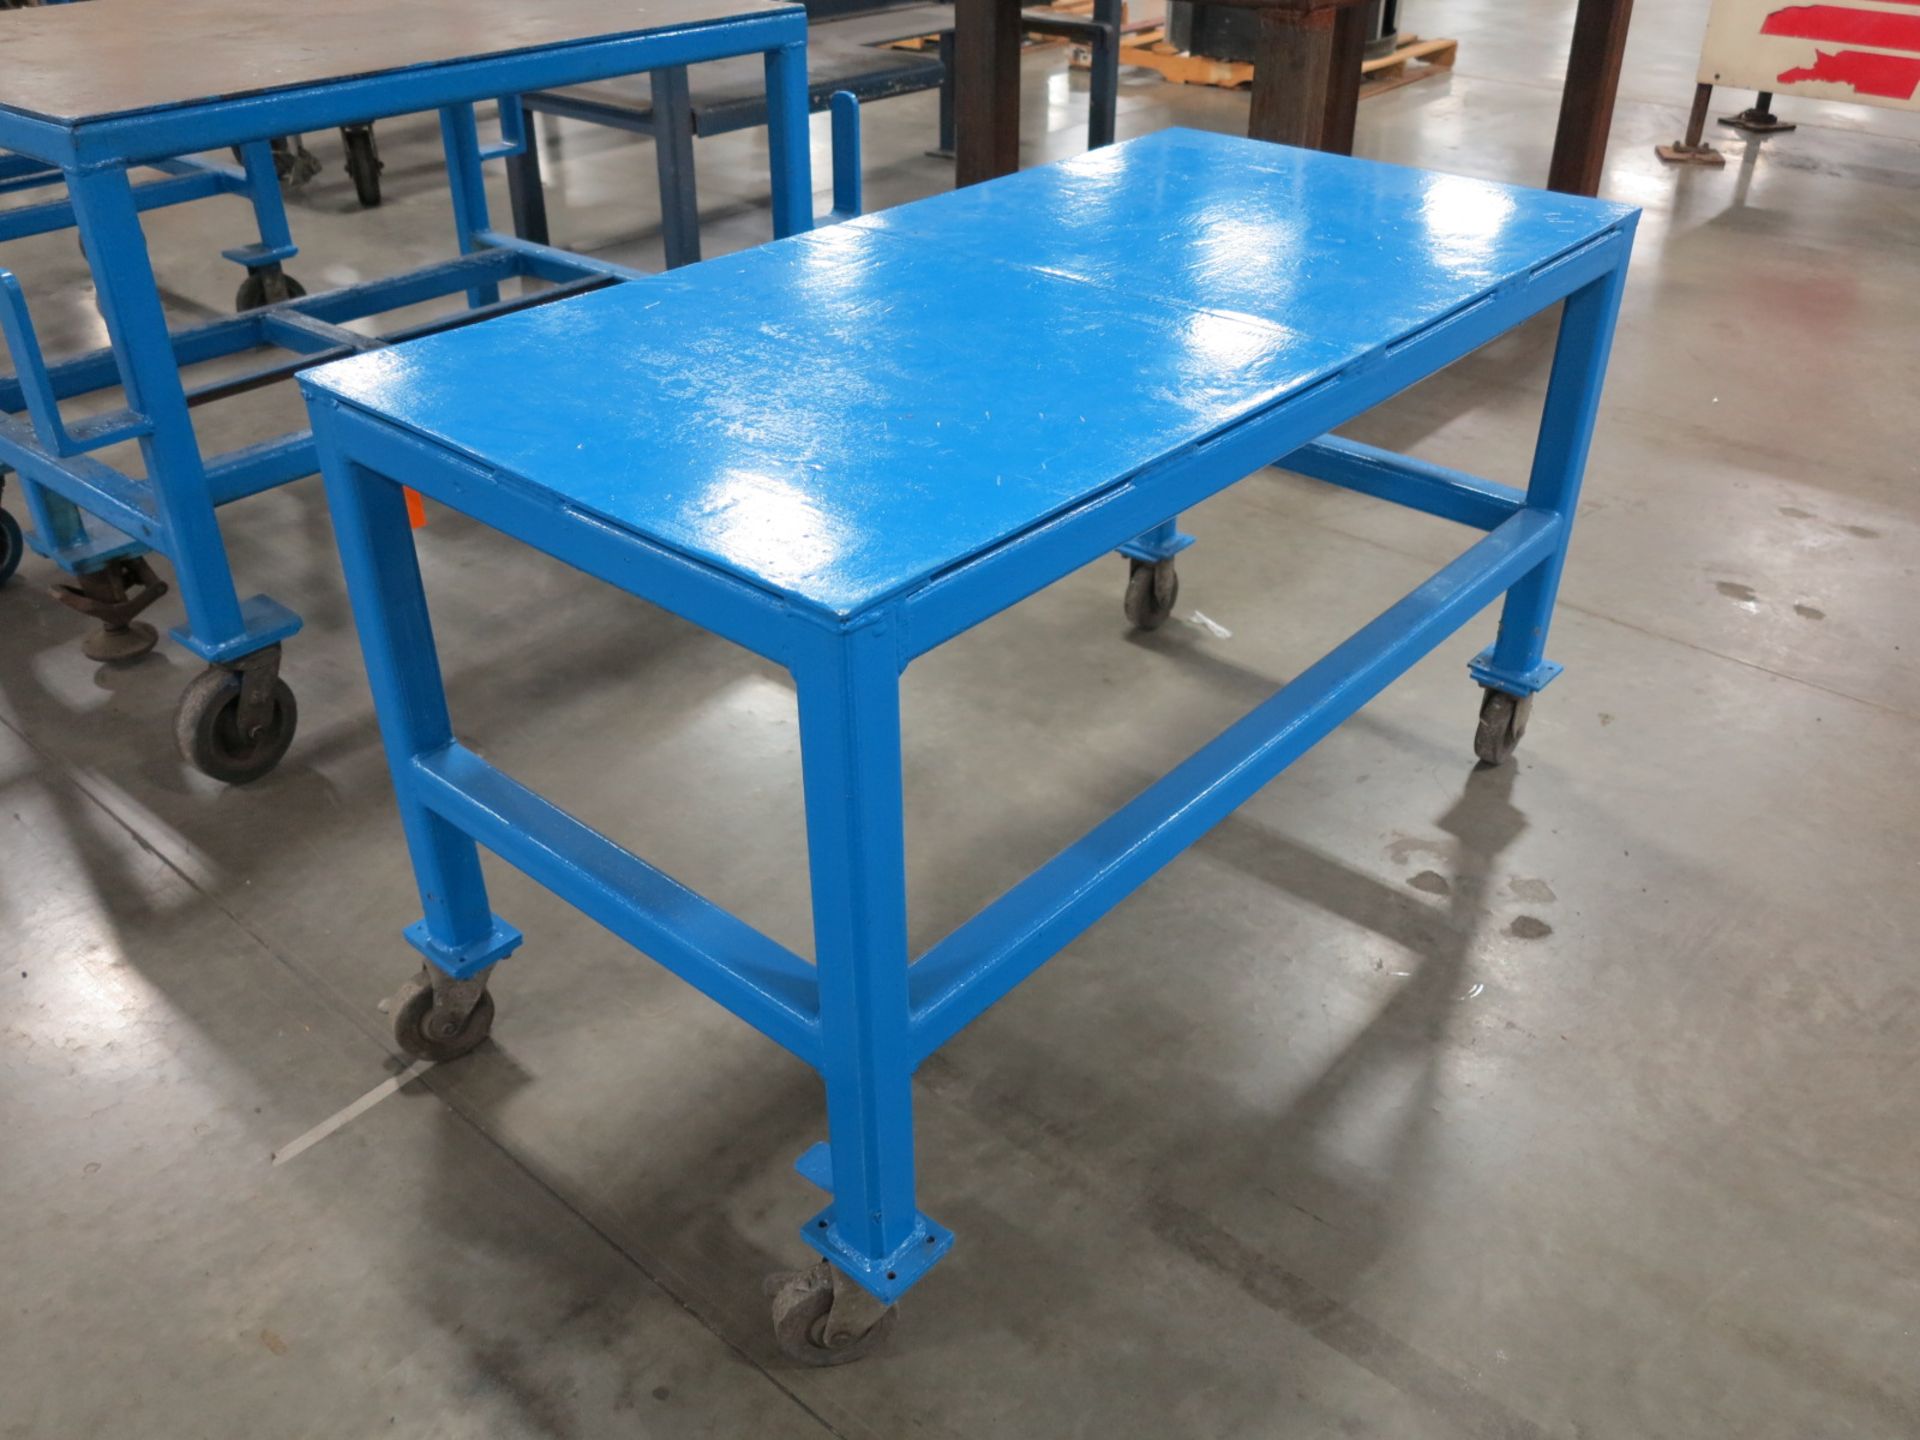 Metal Table on Casters, 42" x 24" x 28" - Image 2 of 2